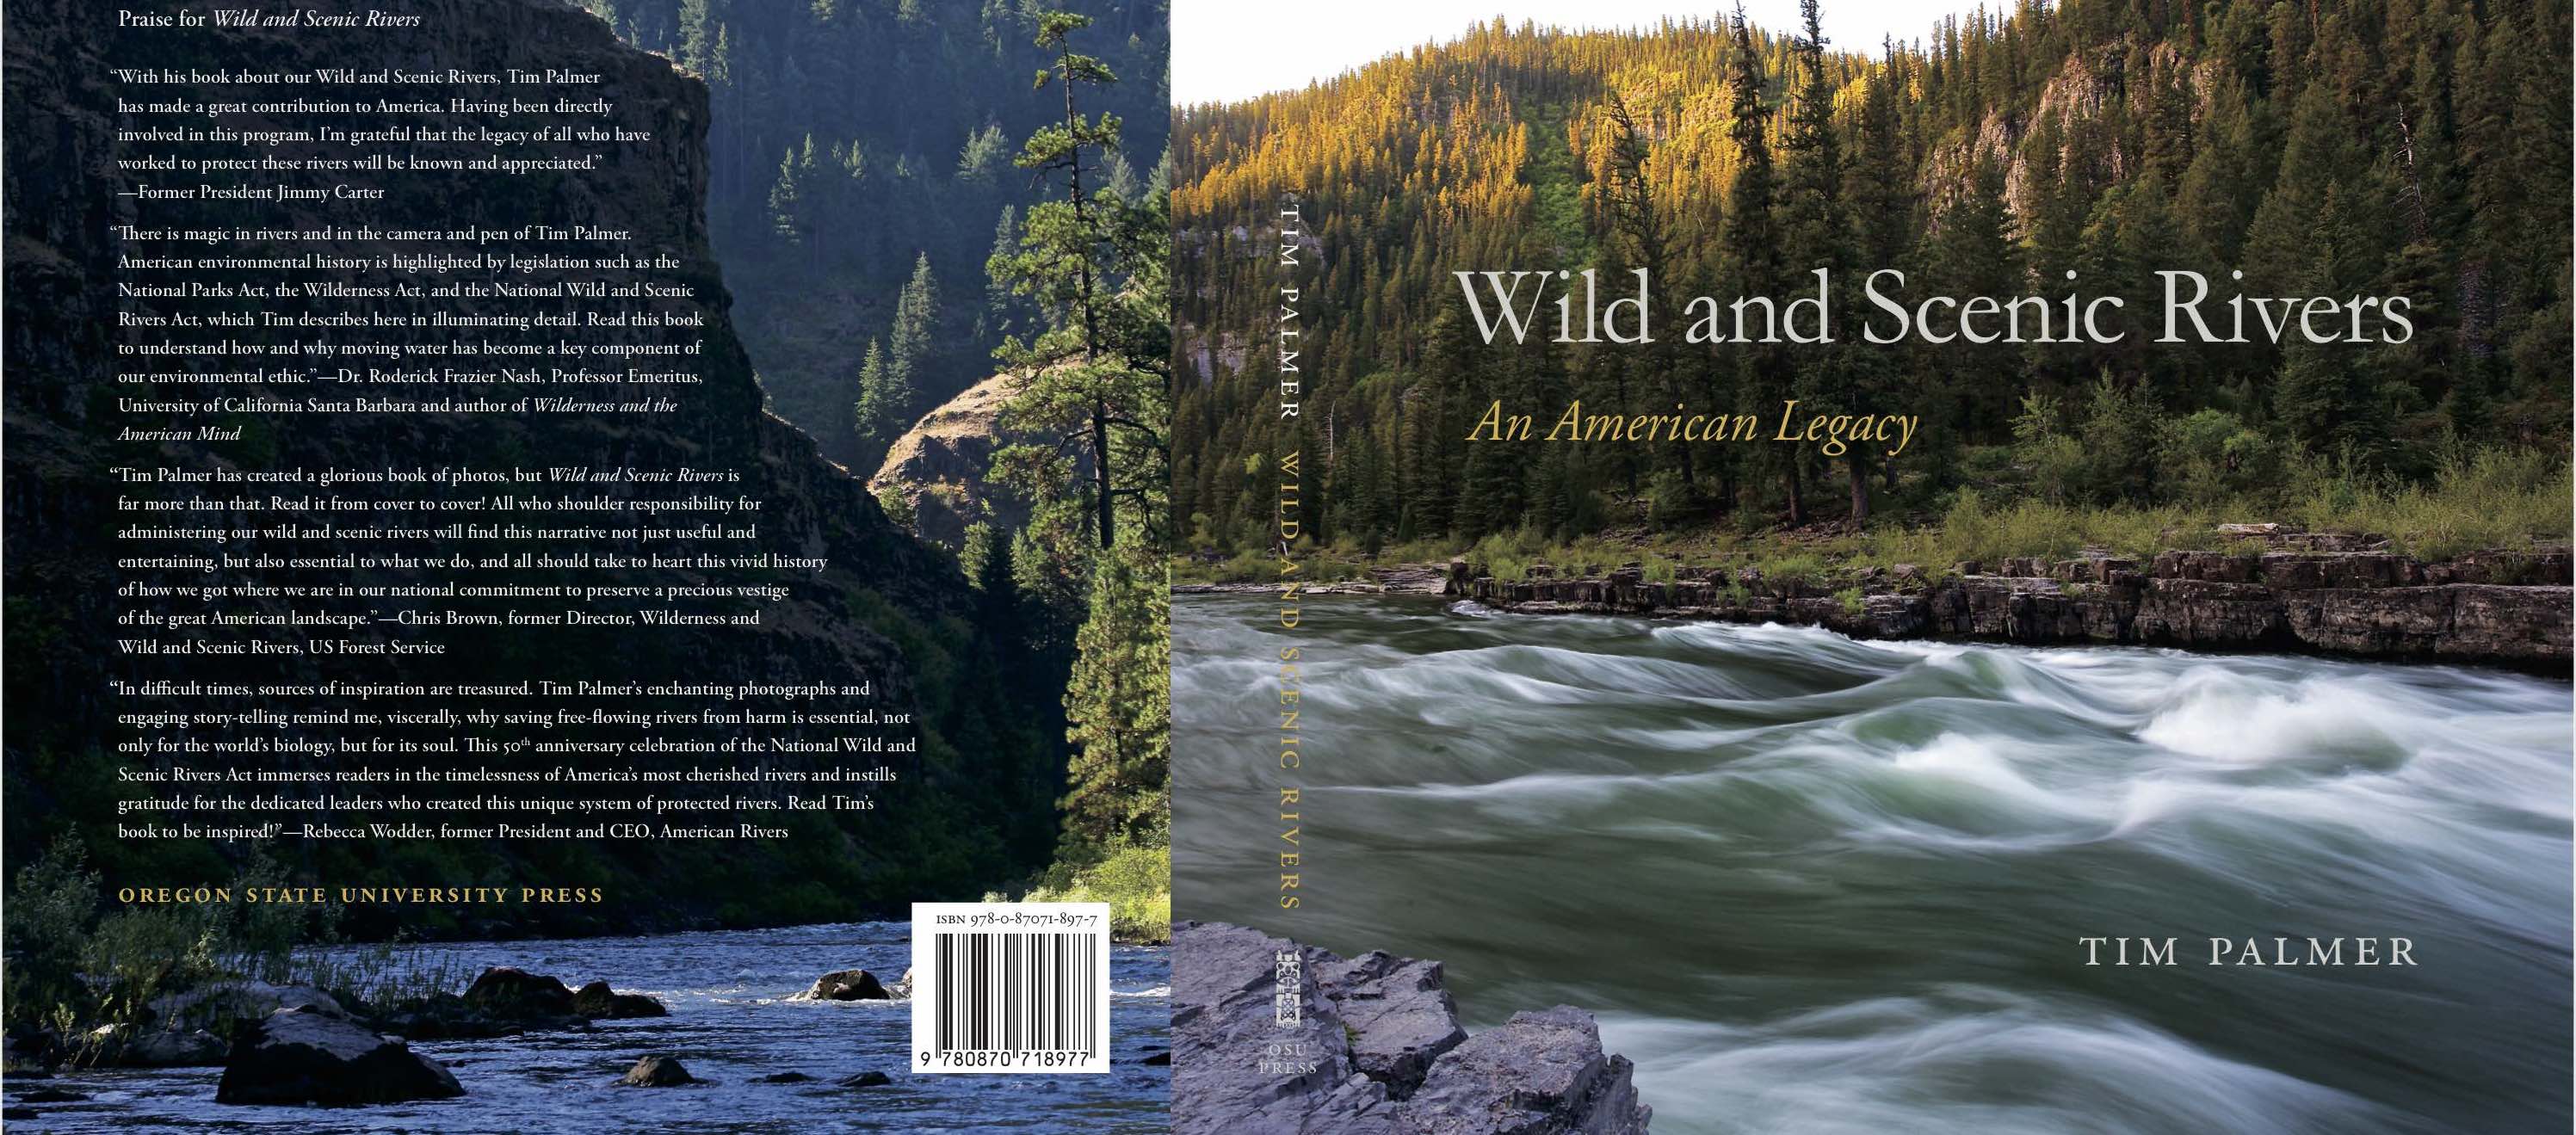 Cover of book including photo of Snake River